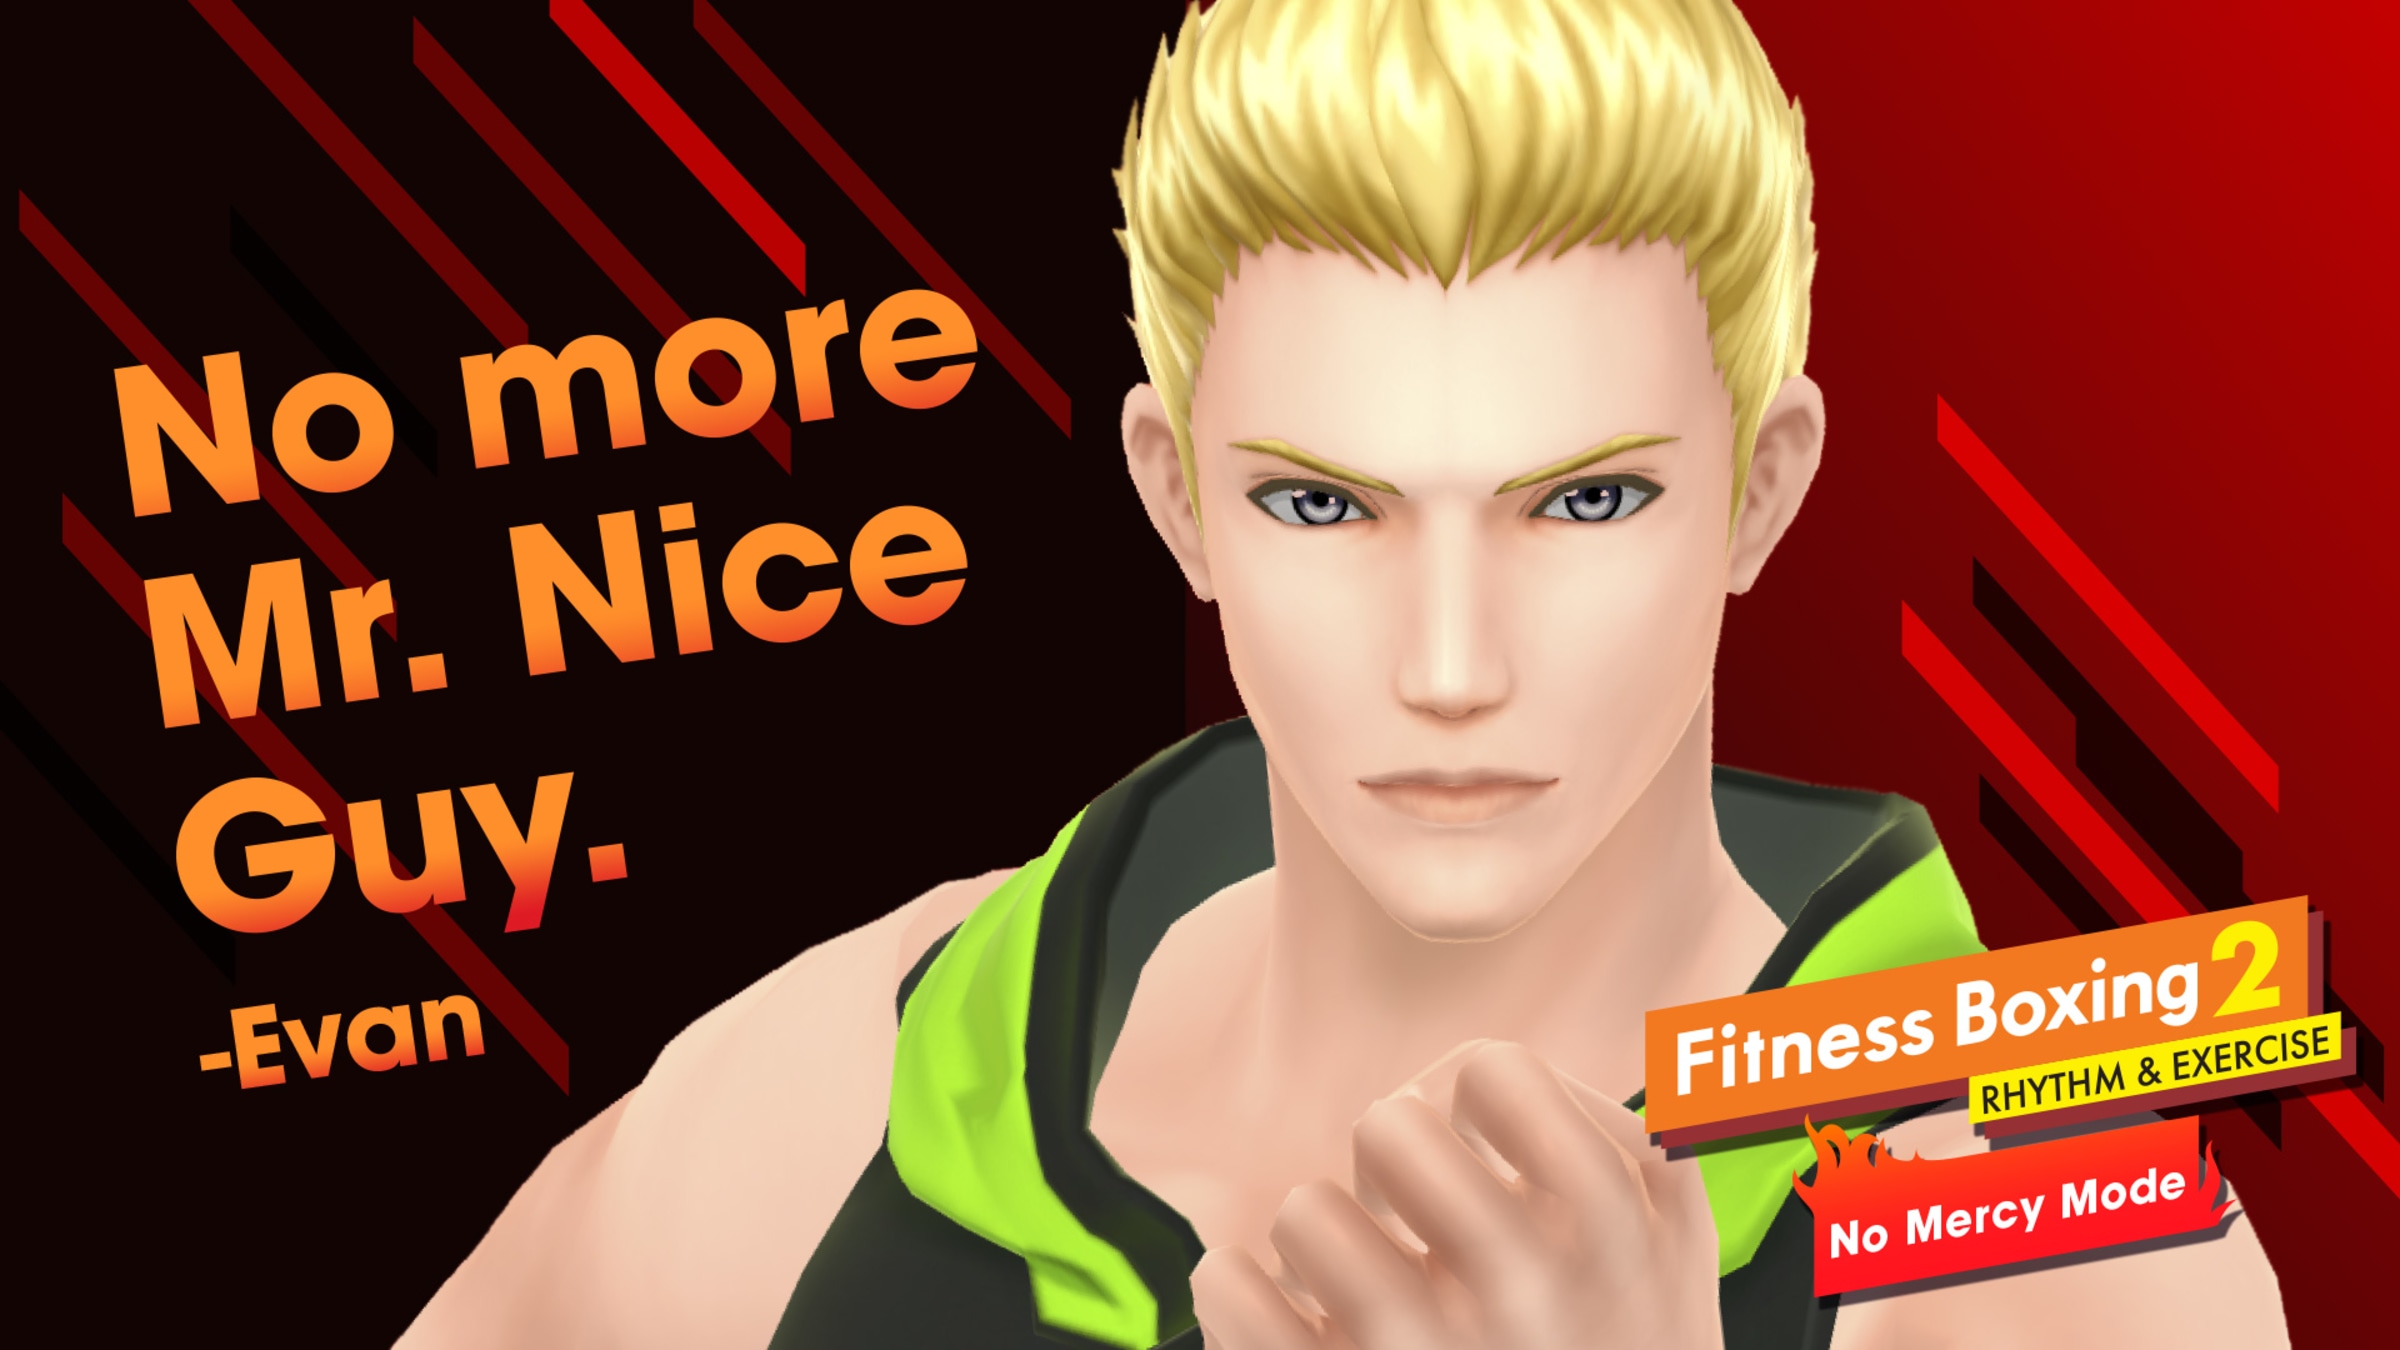 Boxing Rhythm & for Fitness Evan Site 2: - Exercise Switch intensity: No Mercy Nintendo Nintendo Official